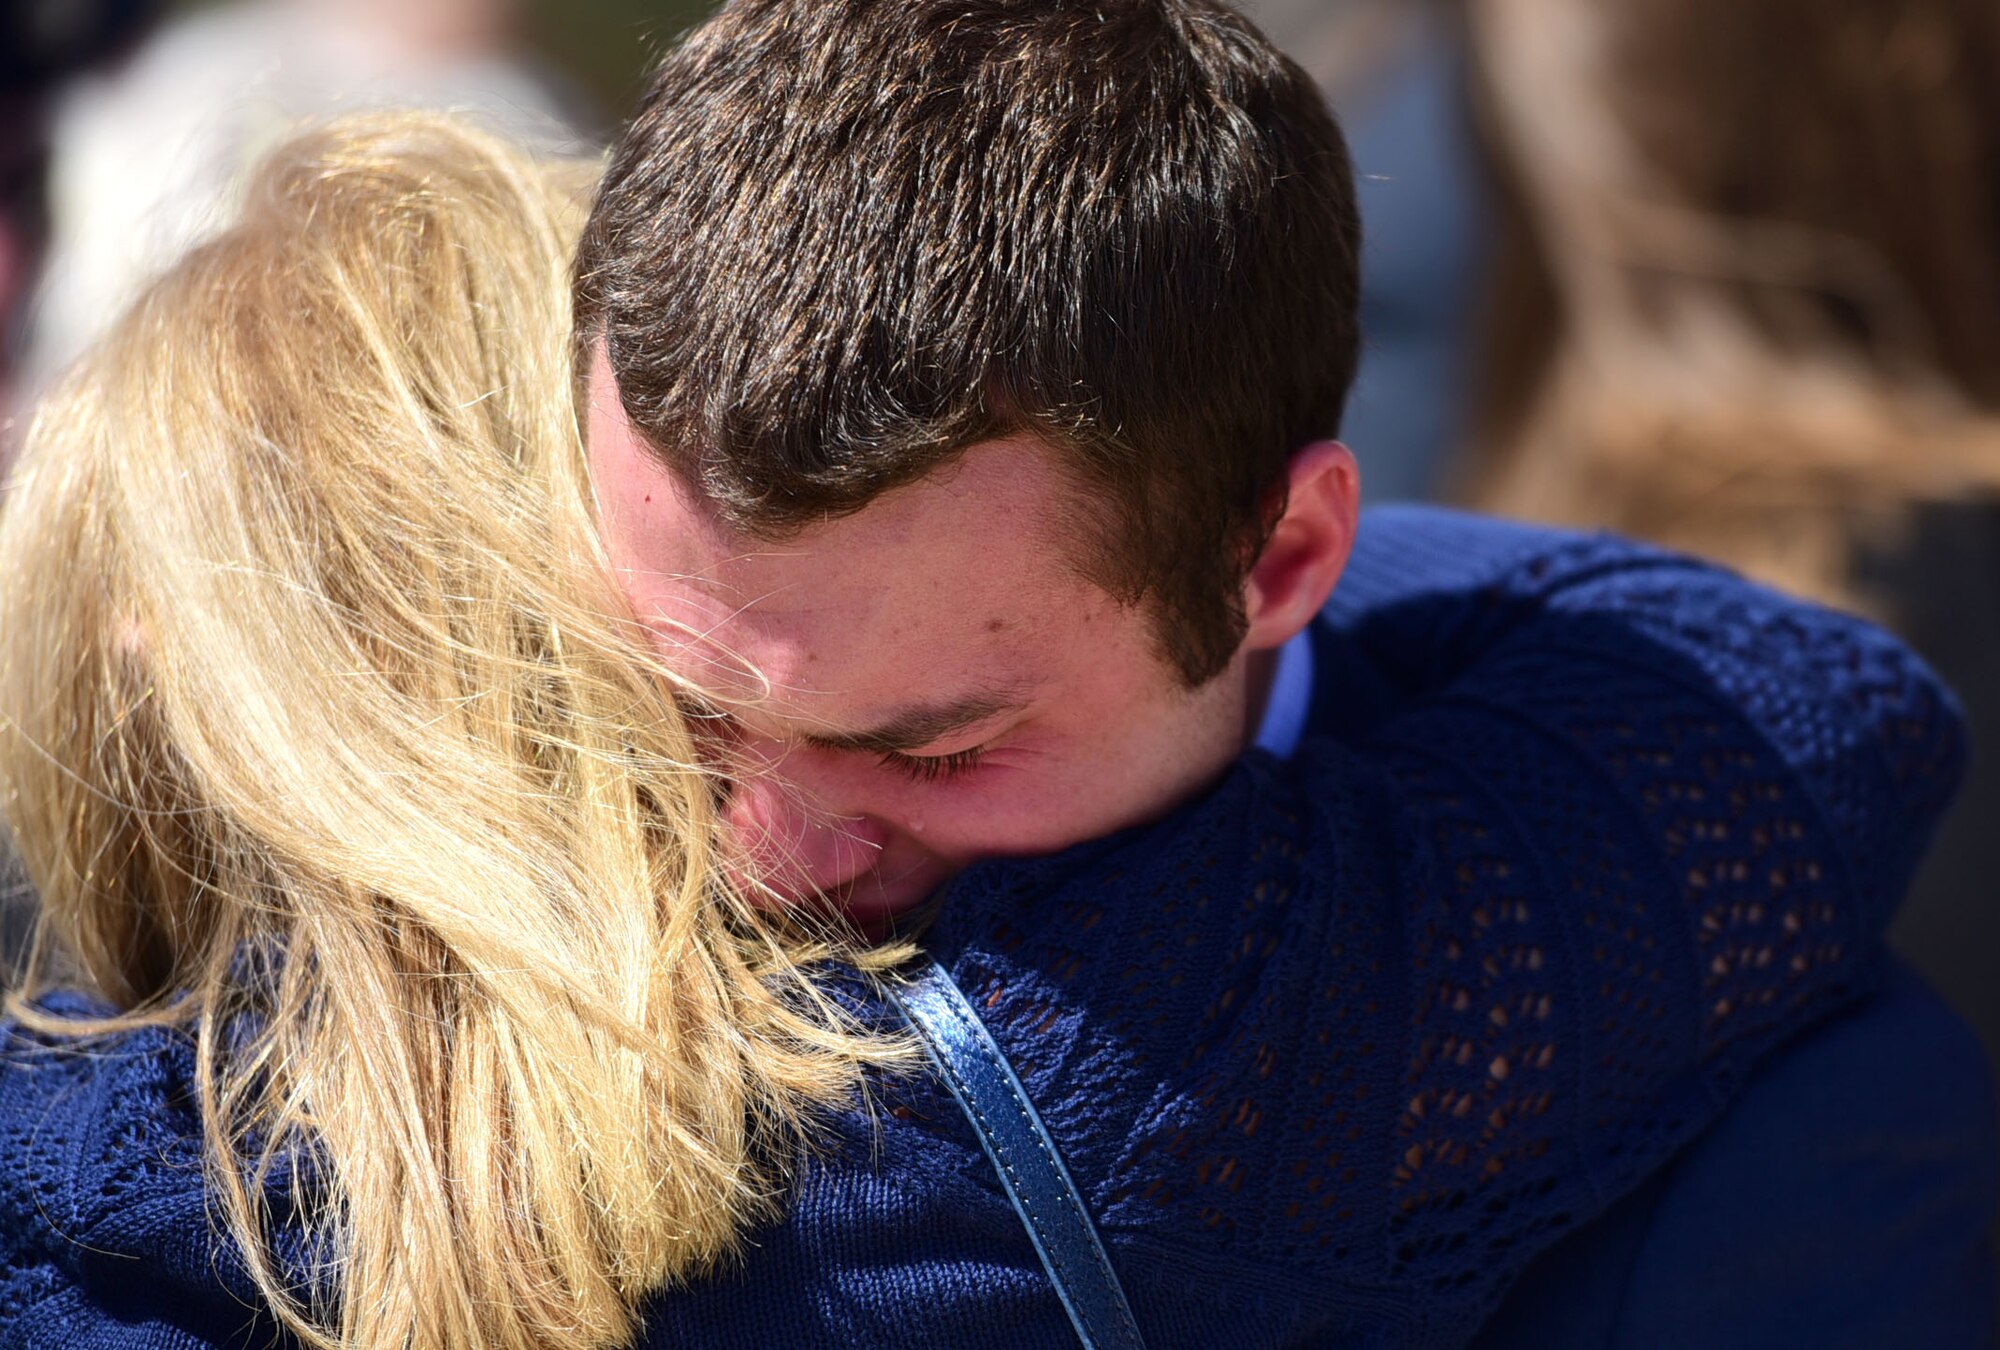 Matt Davis, grandson of Col. Edgar Davis embraces a family member after his grandfather’s funeral ceremony April 6, 2018, Goldsboro, North Carolina. Davis served as an RF-4C Phantom navigator during the Vietnam War assigned to the 11th Tactical Reconnaissance Squadron. The unit exists today as the 11th Attack Squadron flying the MQ-9 Reaper. (U.S. Air Force photo by Senior Airman Christian Clausen)